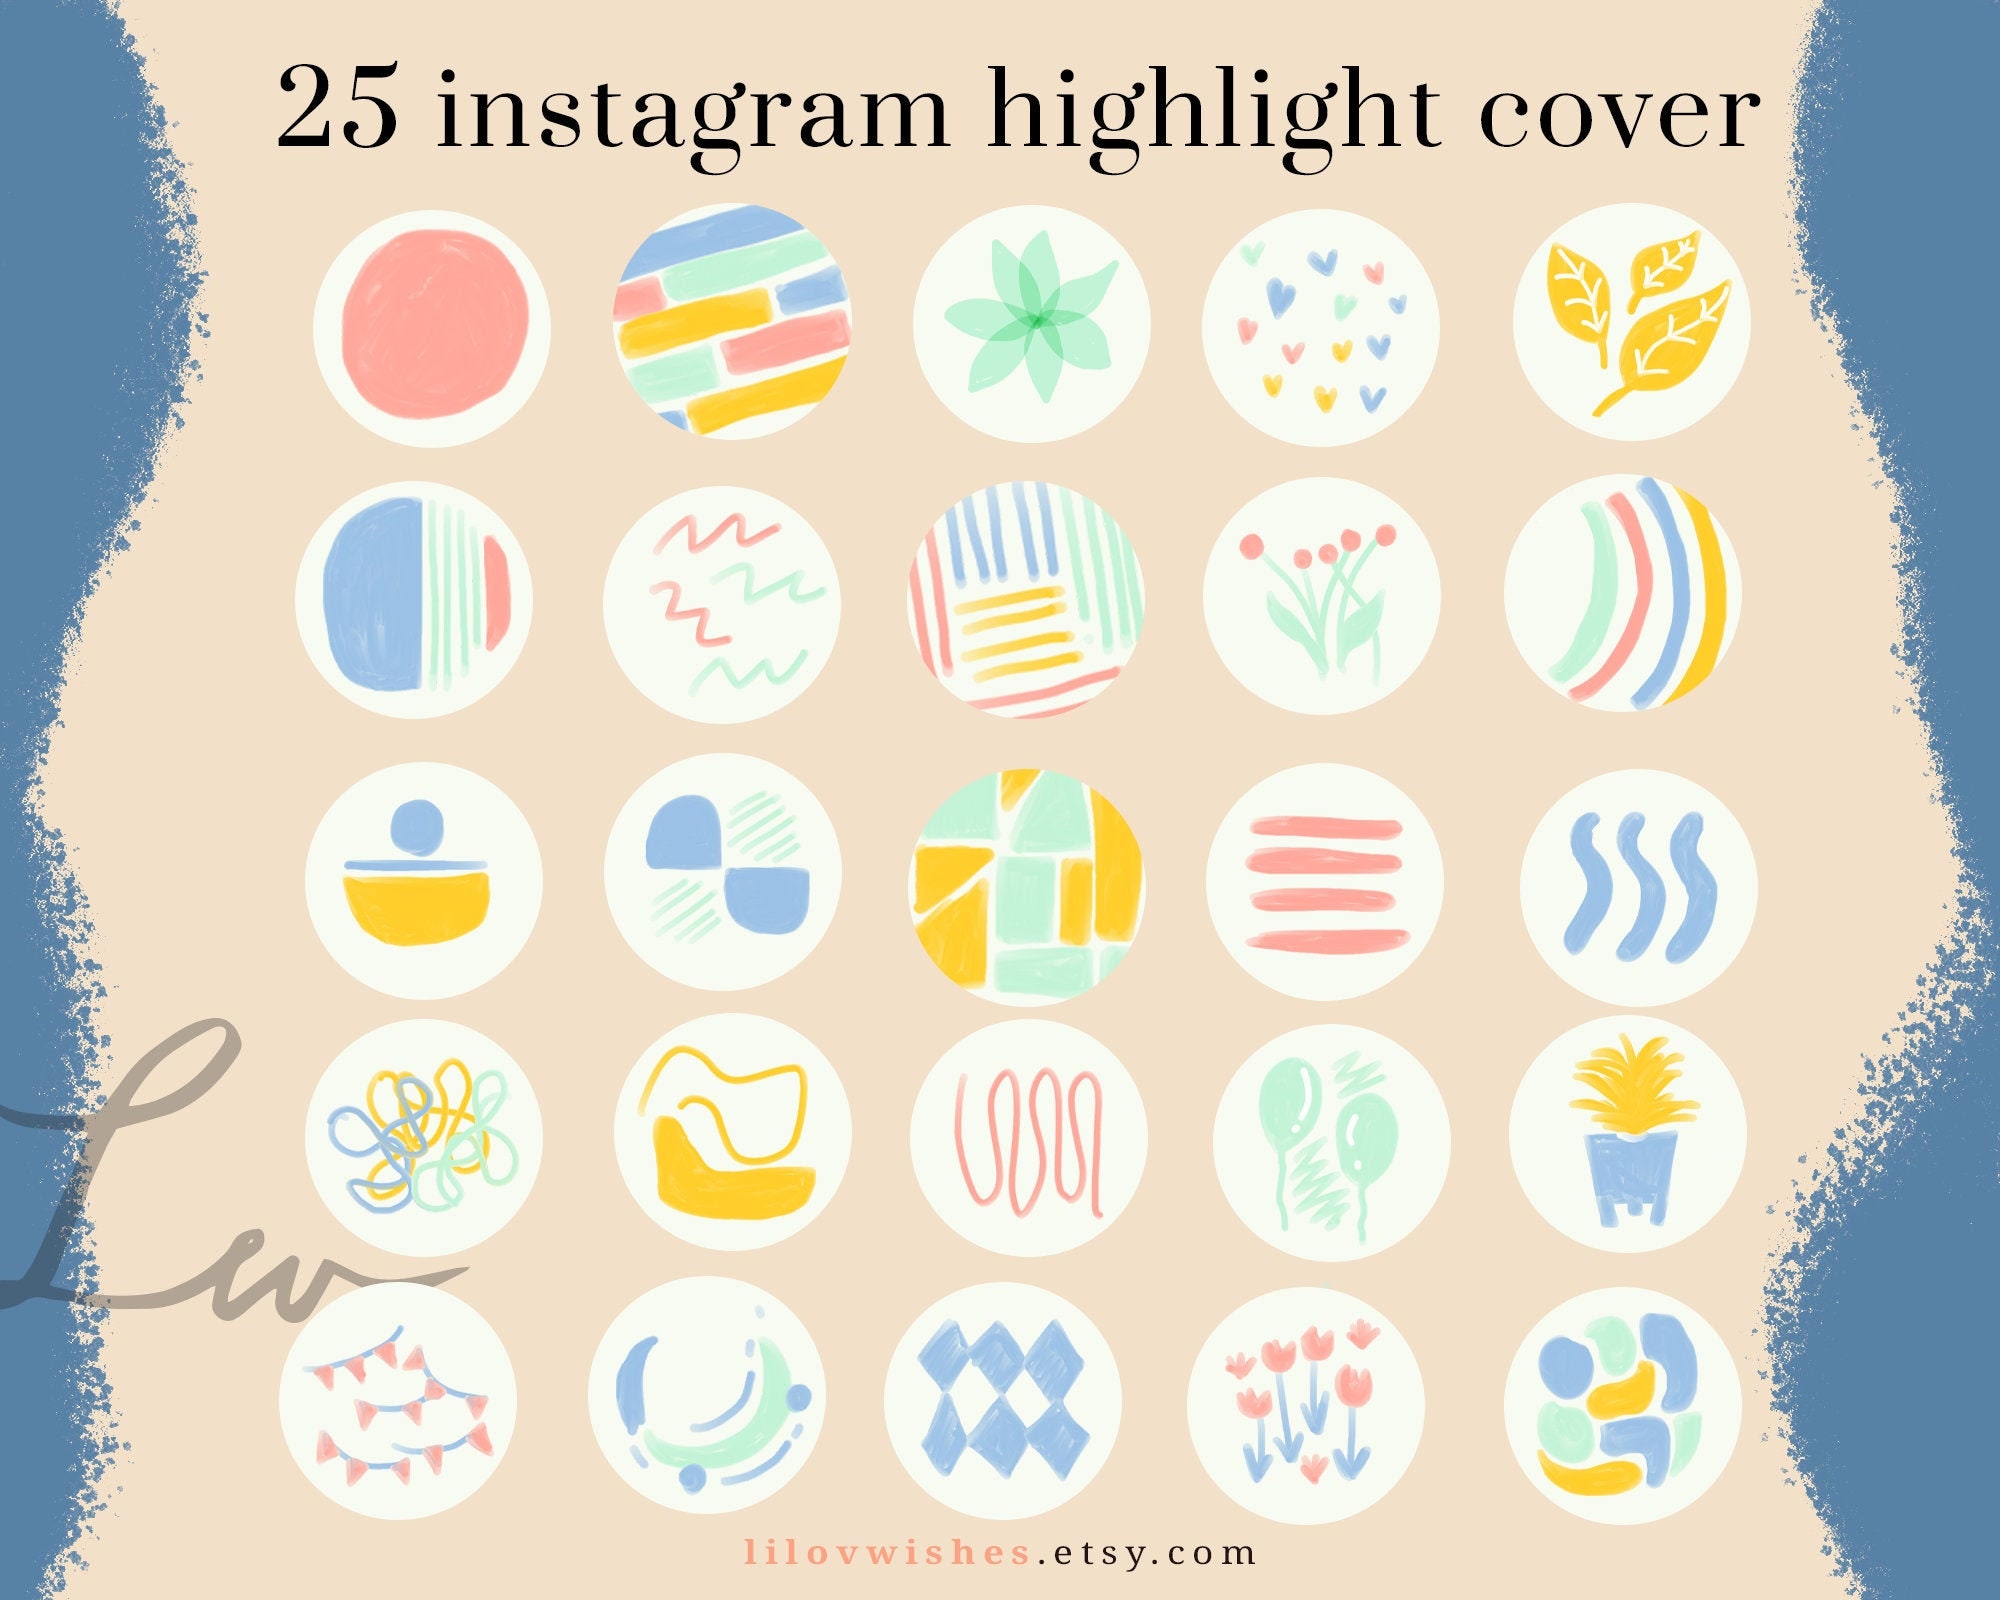 25 Doodle Instagram Highlight Cover Colorful Theme Icons - Etsy UK